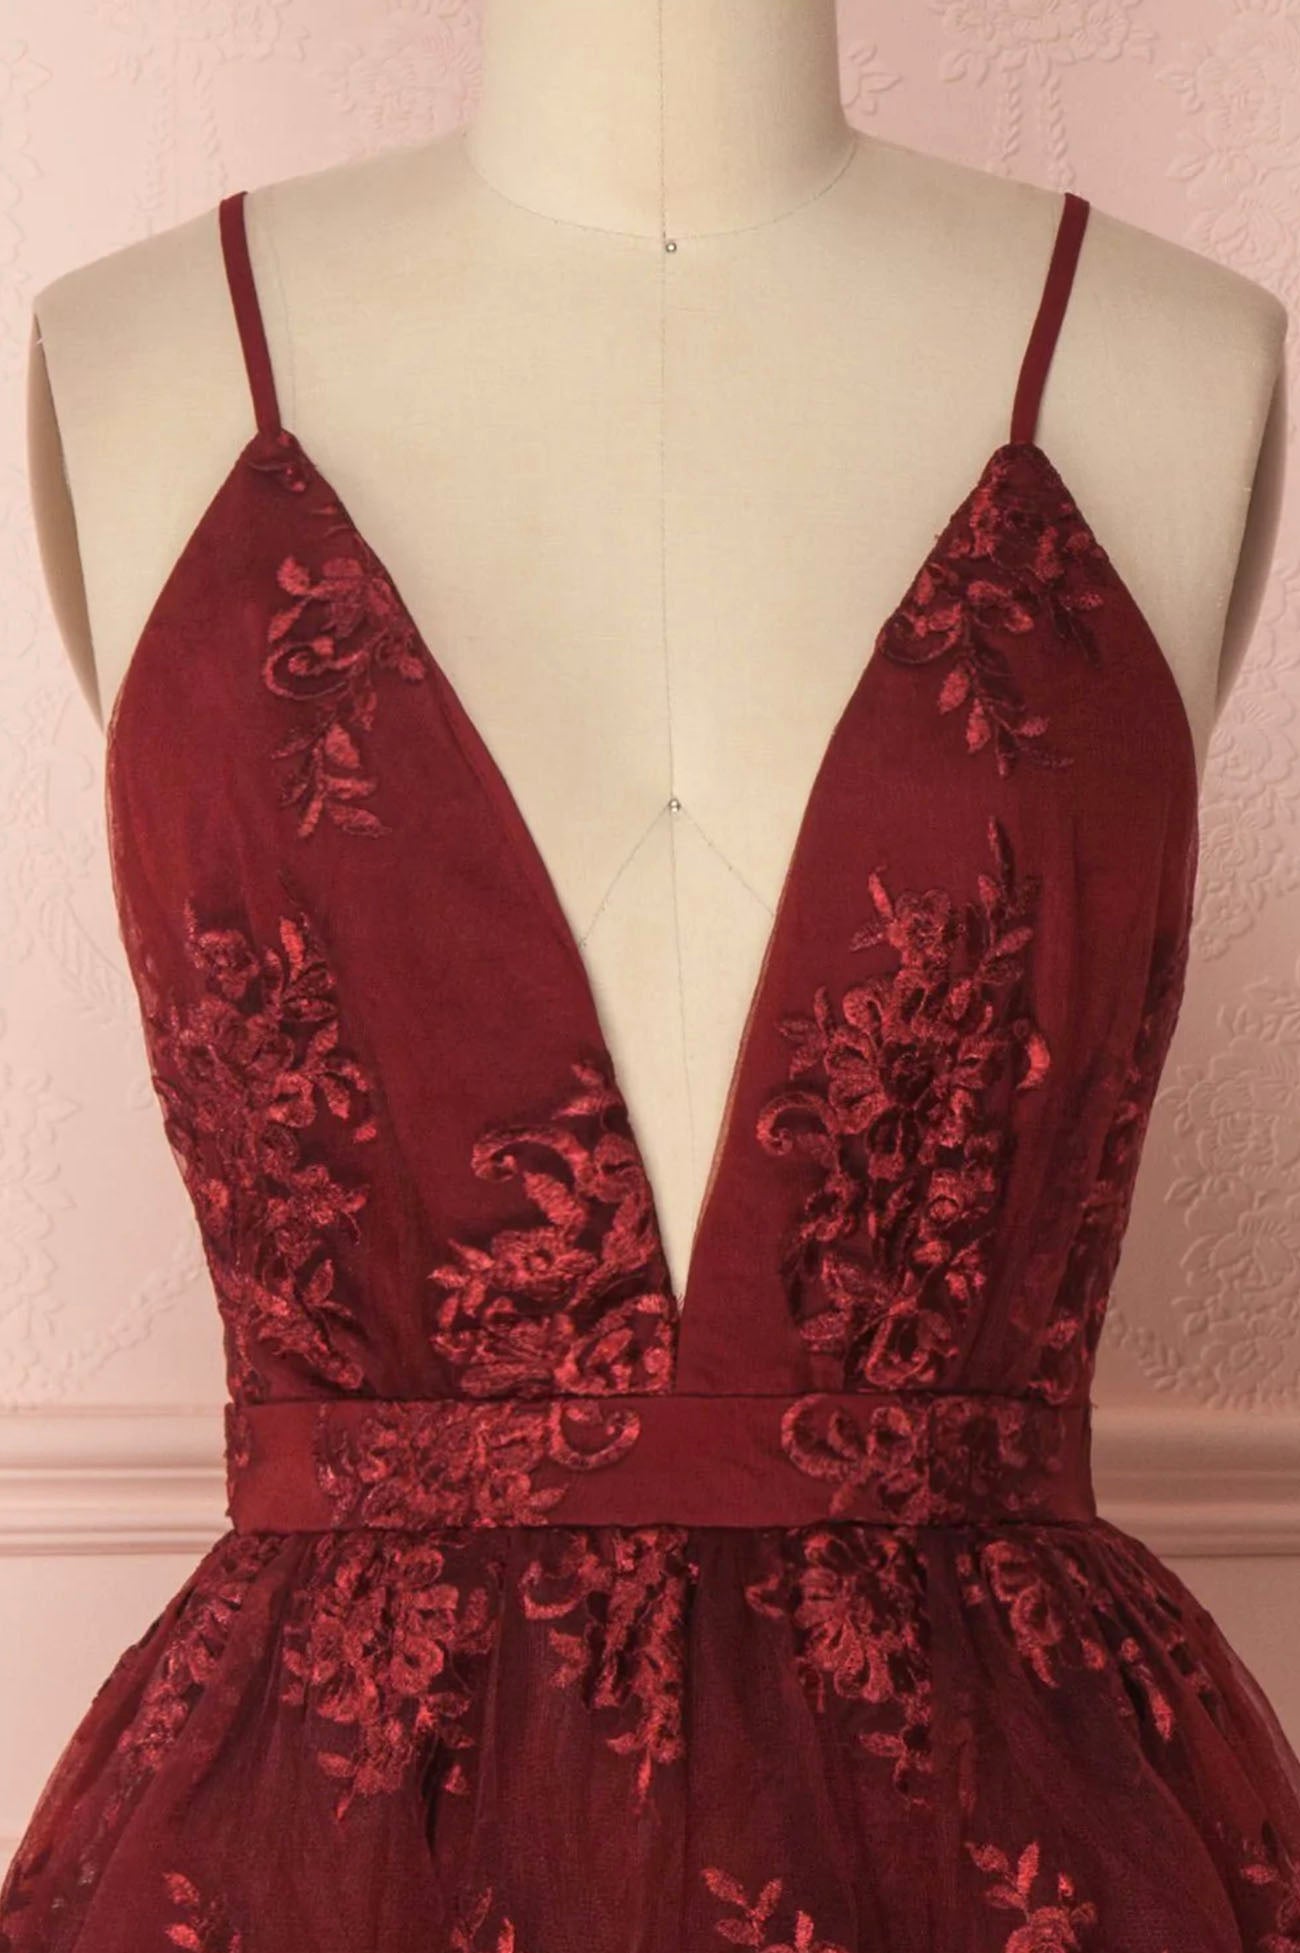 Party Dress For Night, Burgundy V-Neck Lace Short Backless Prom Dress, Cute Lace Party Dress